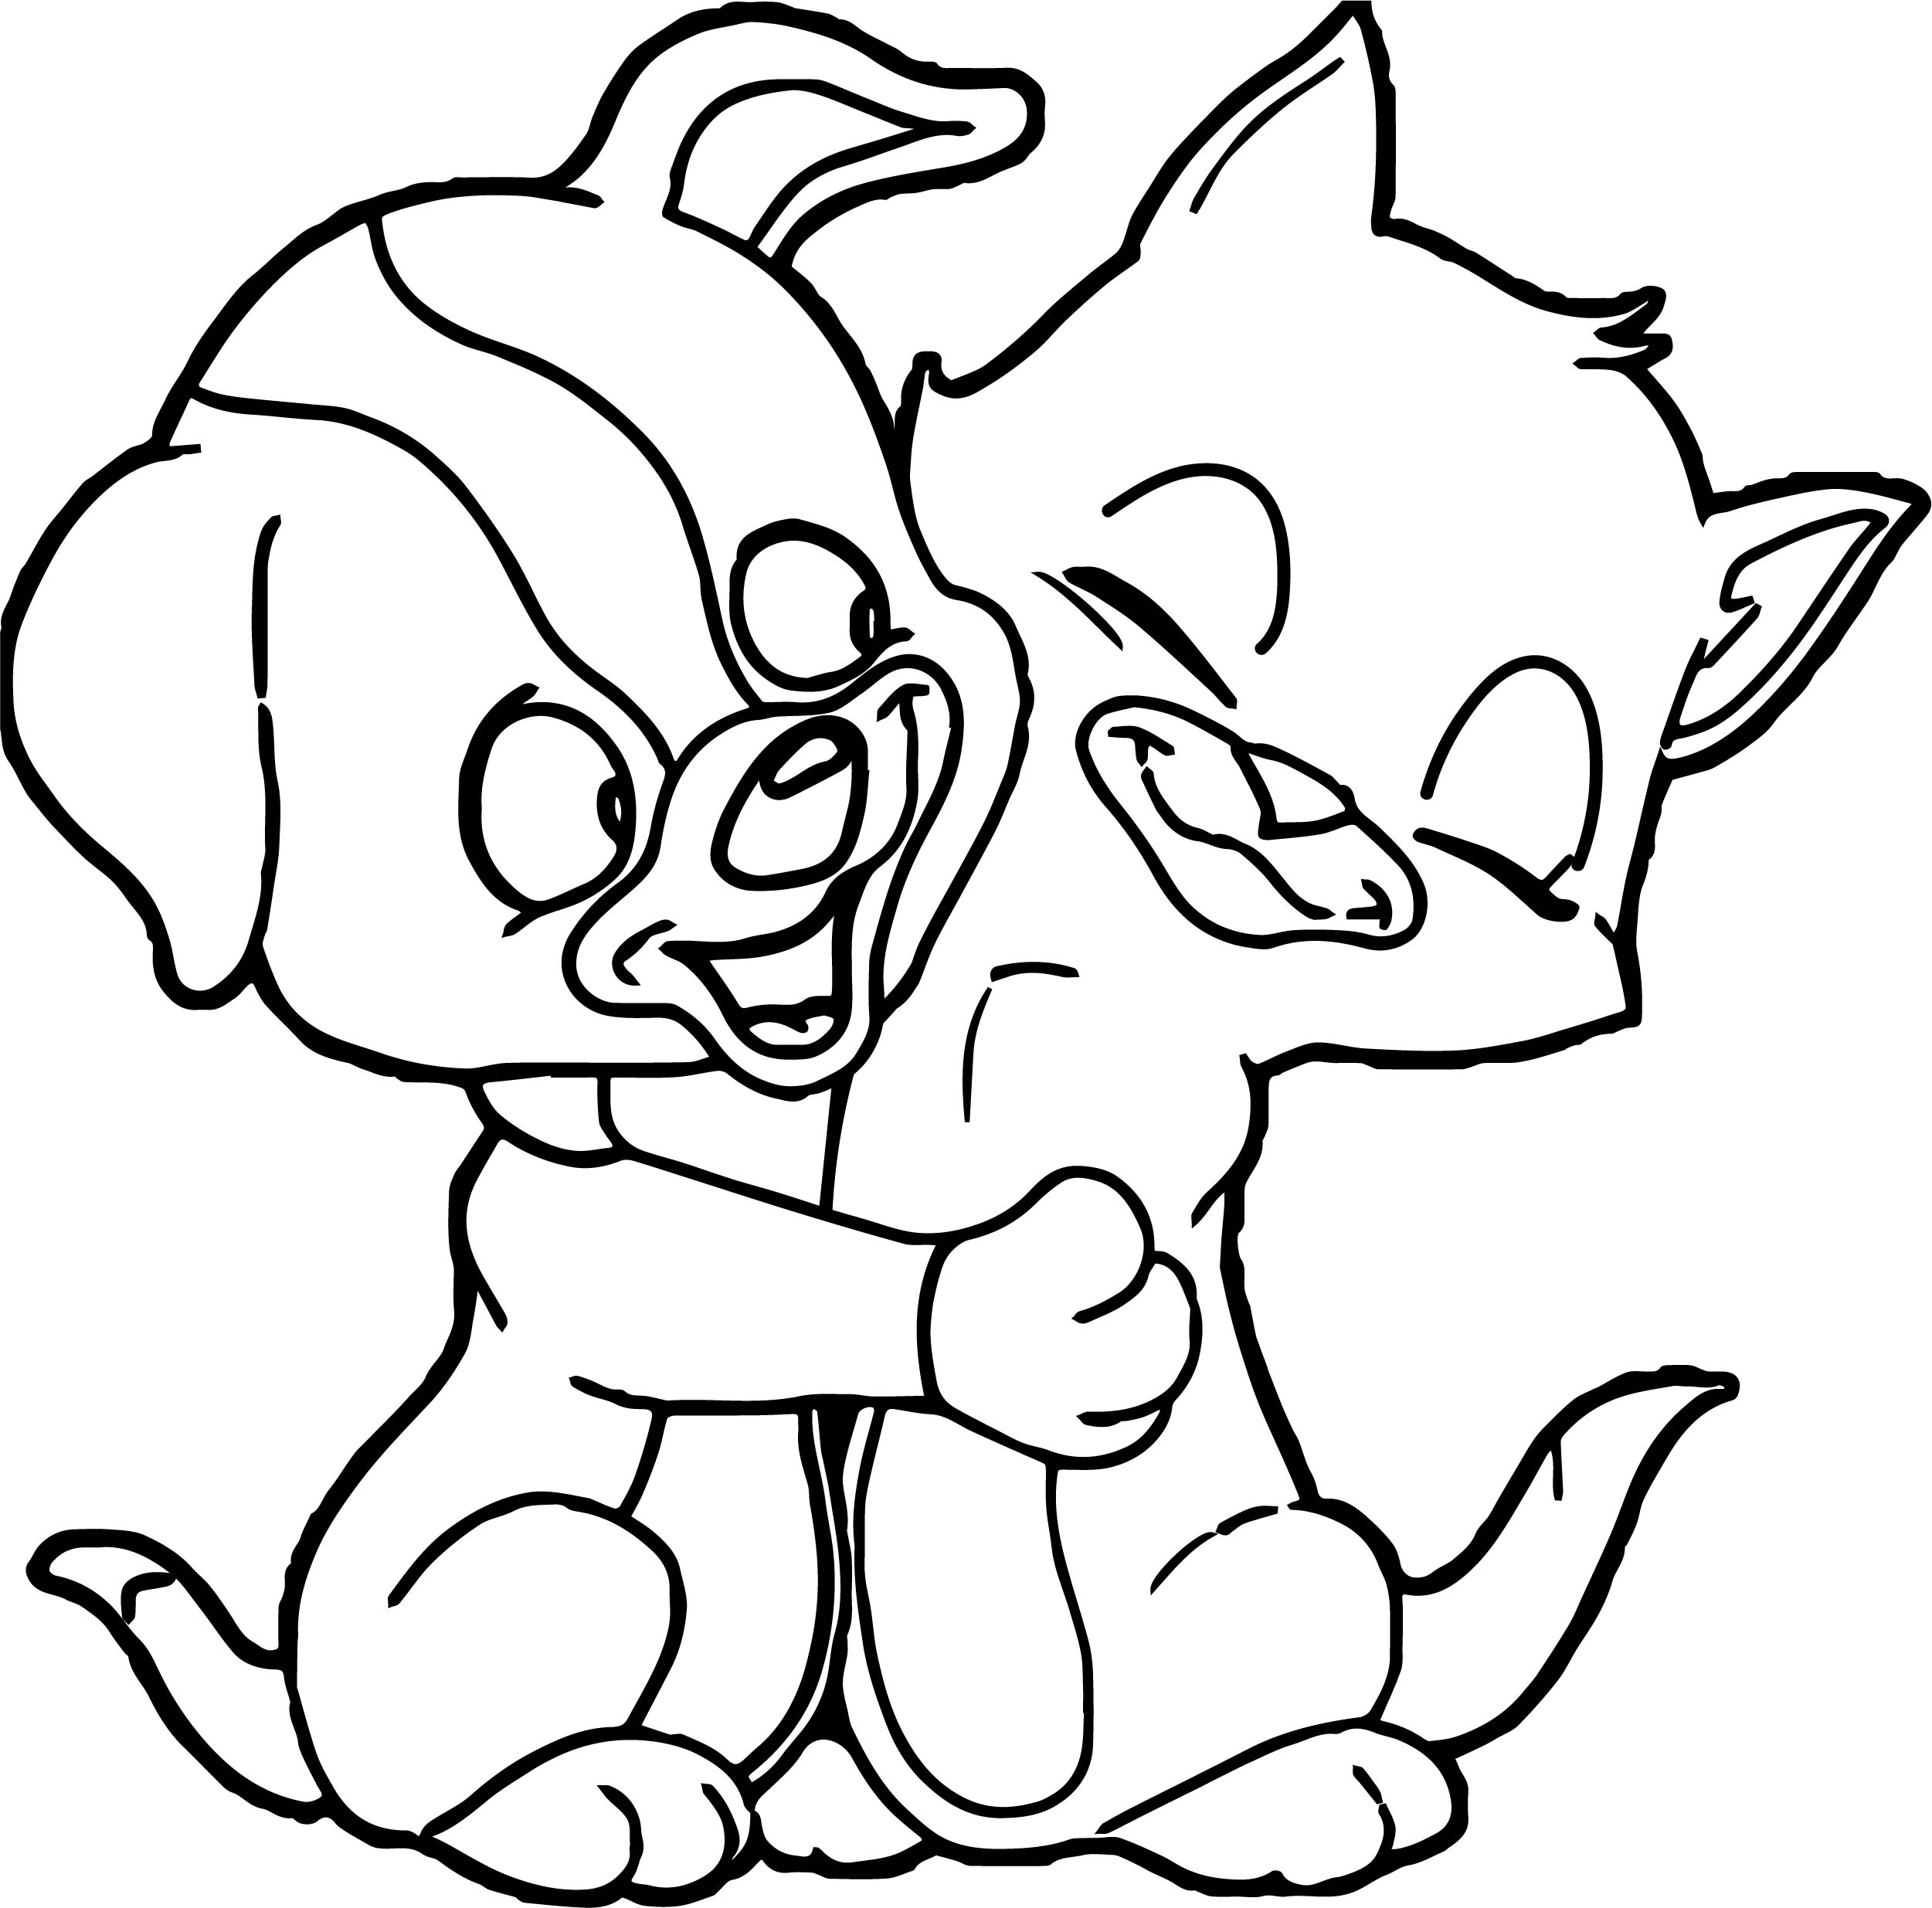 Dog And Cat Friends Coloring Page Wecoloringpagecom